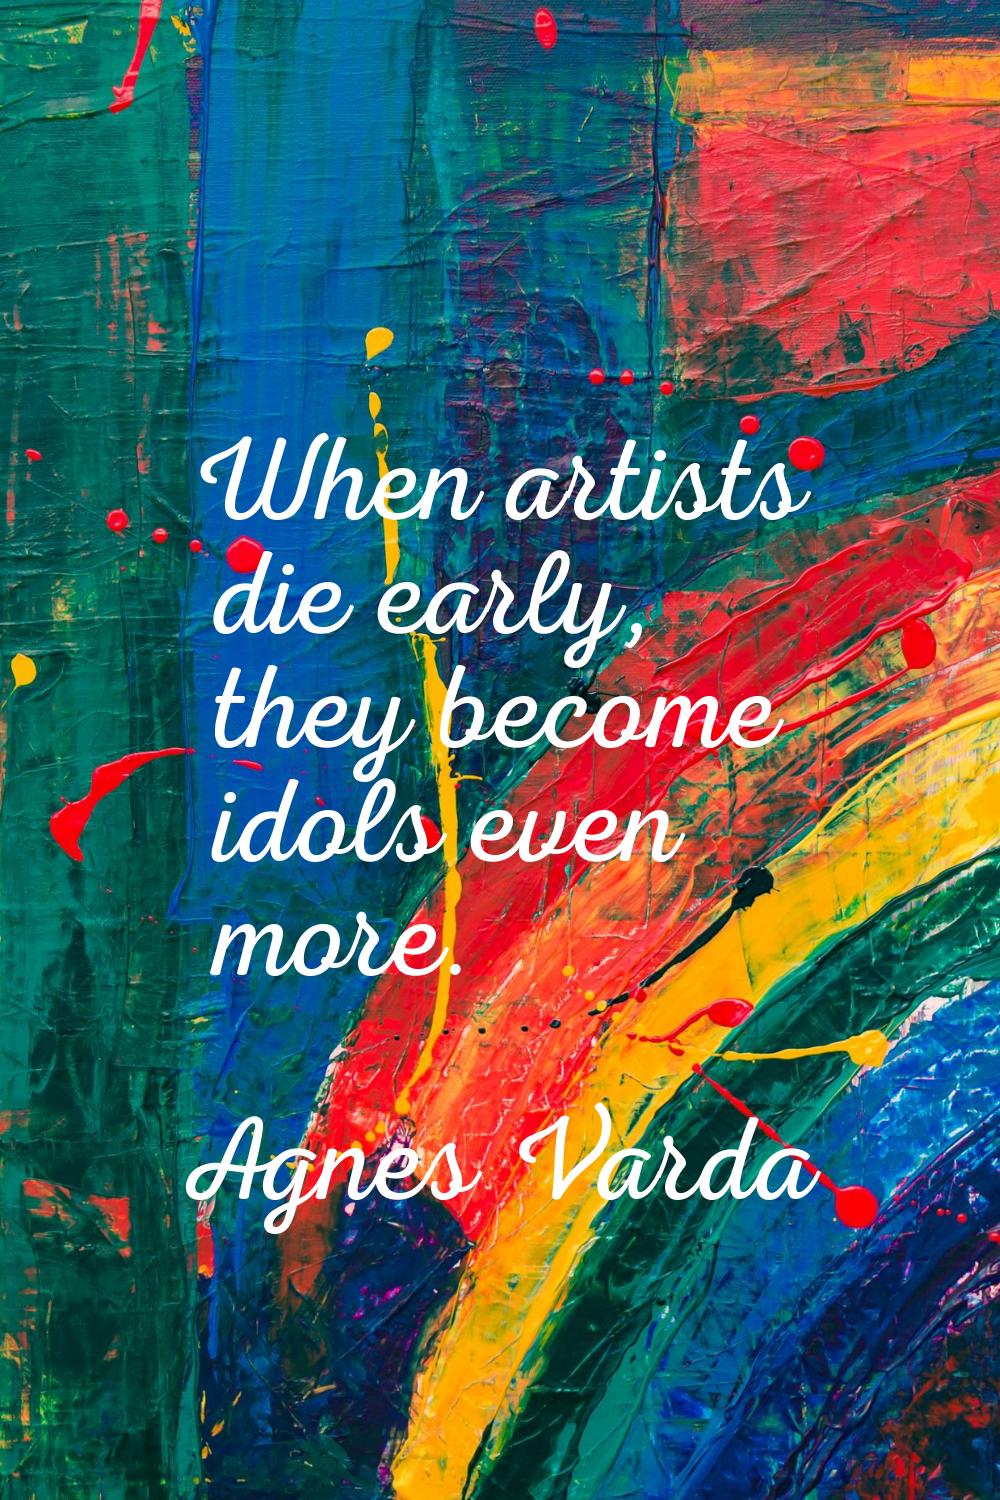 When artists die early, they become idols even more.